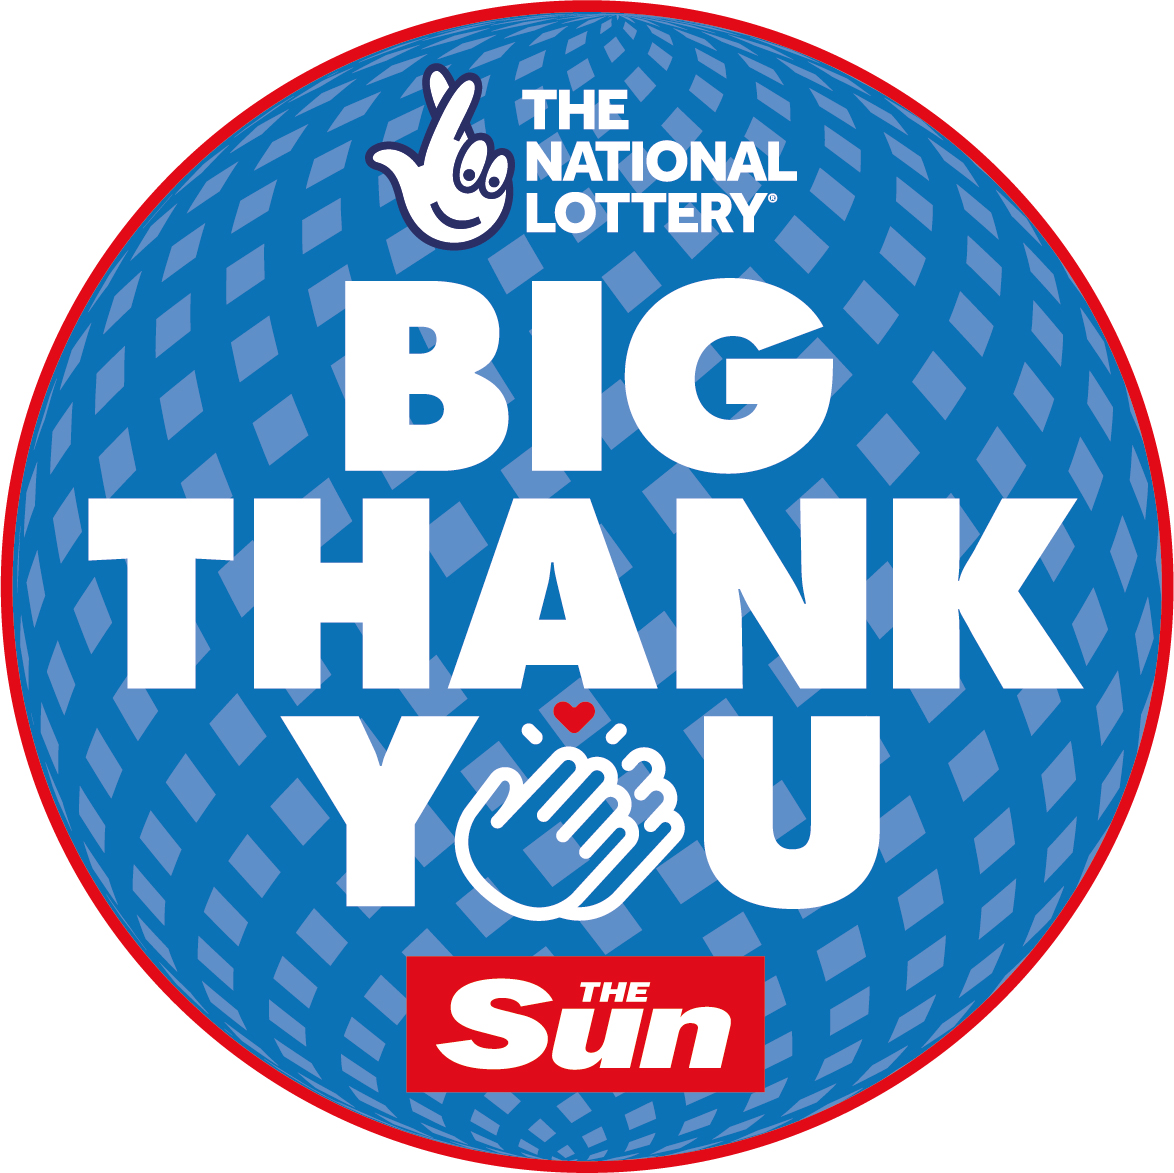 The National Lottery’s Big Thank You concerts with The Sun go off with a bang